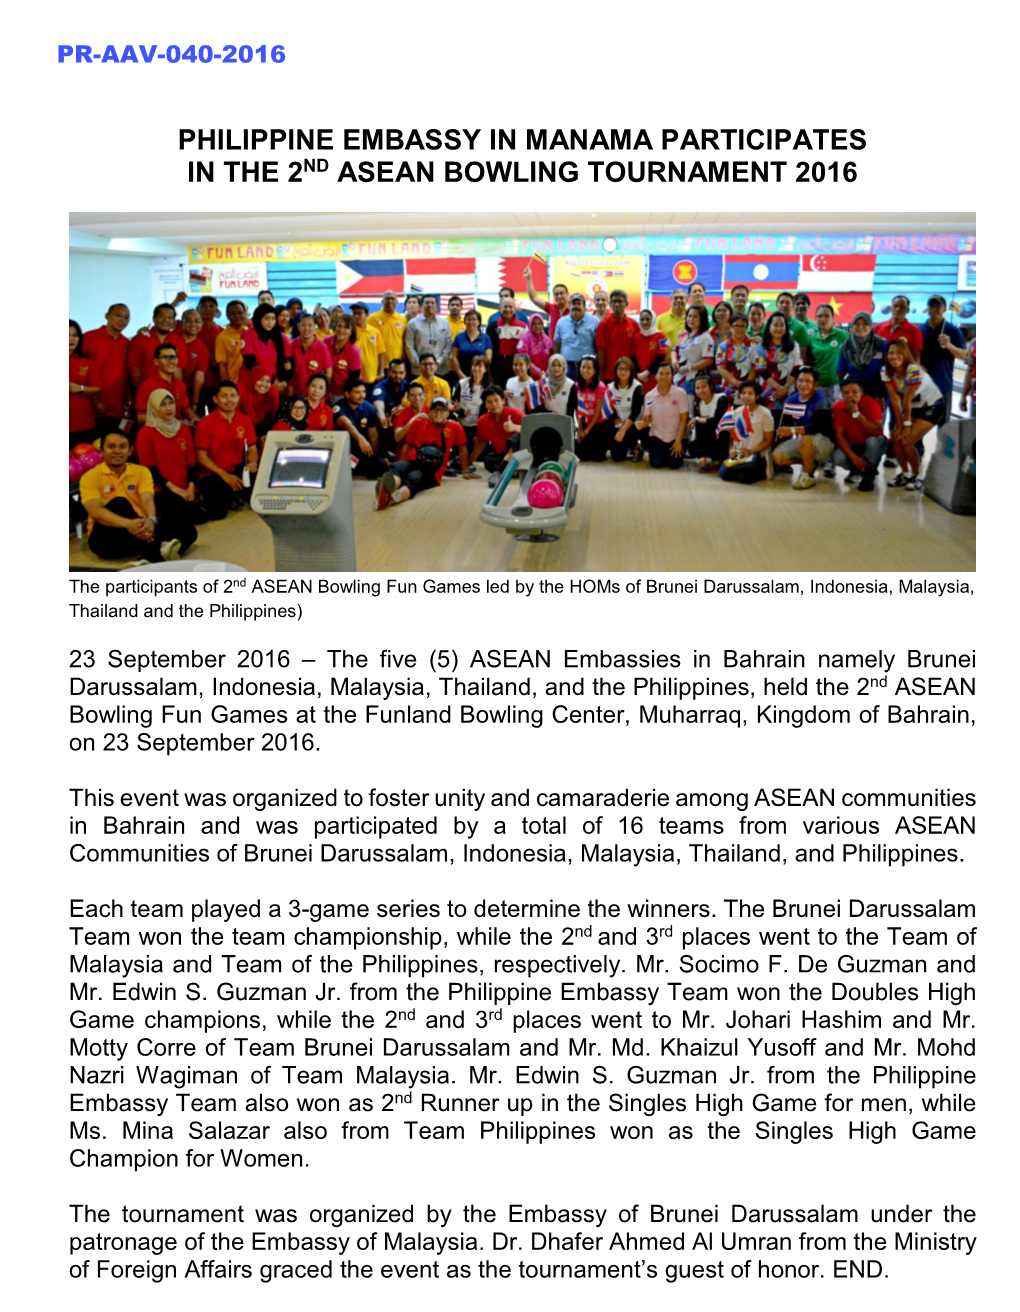 Philippine Embassy in Manama Participates in the 2Nd Asean Bowling Tournament 2016